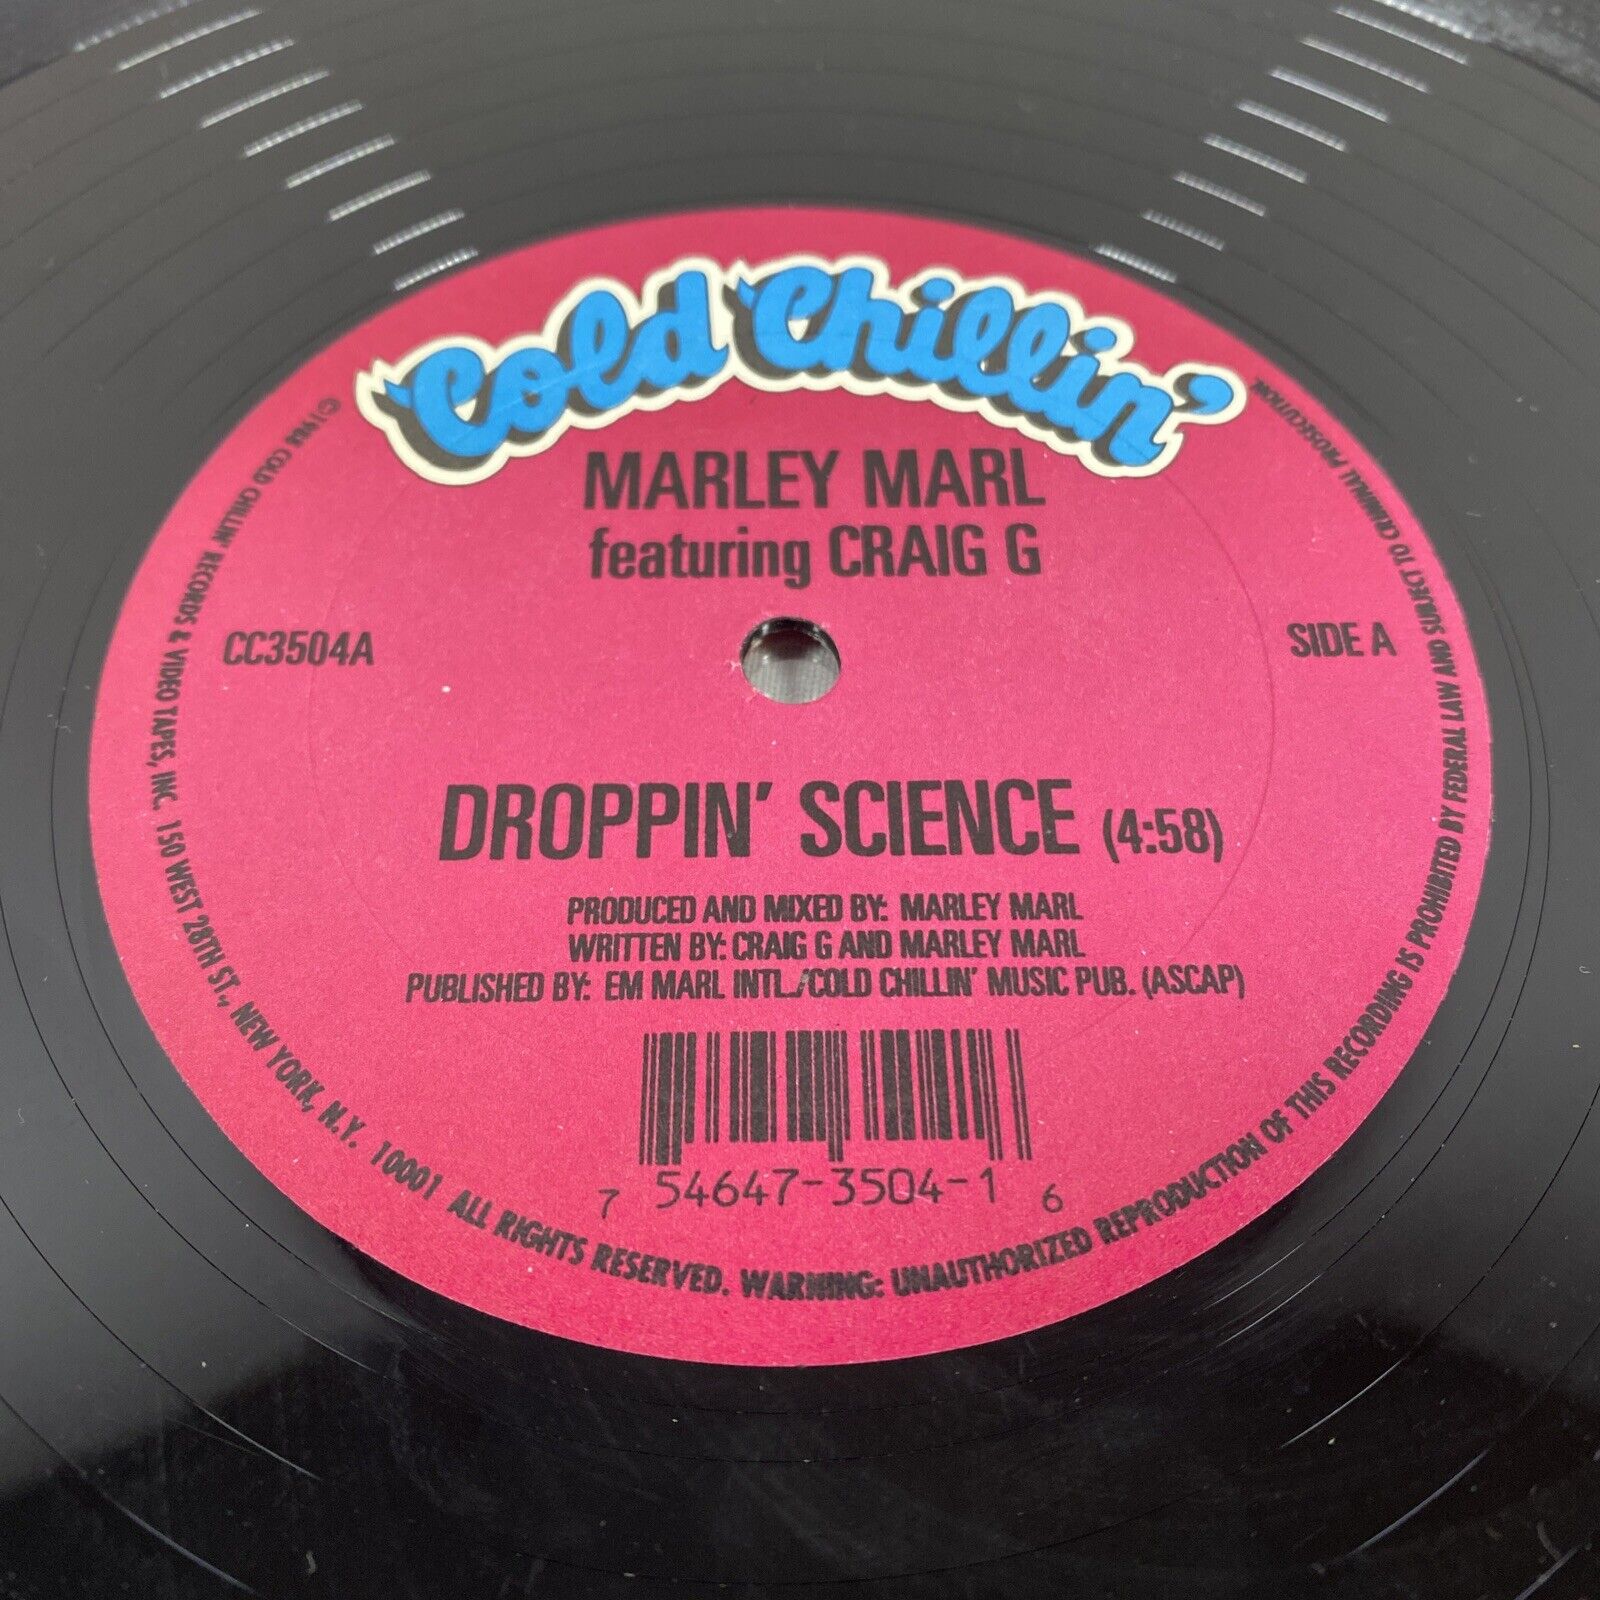 Marley Marl Featuring Craig G - Droppin' Science - Juice Crew All 